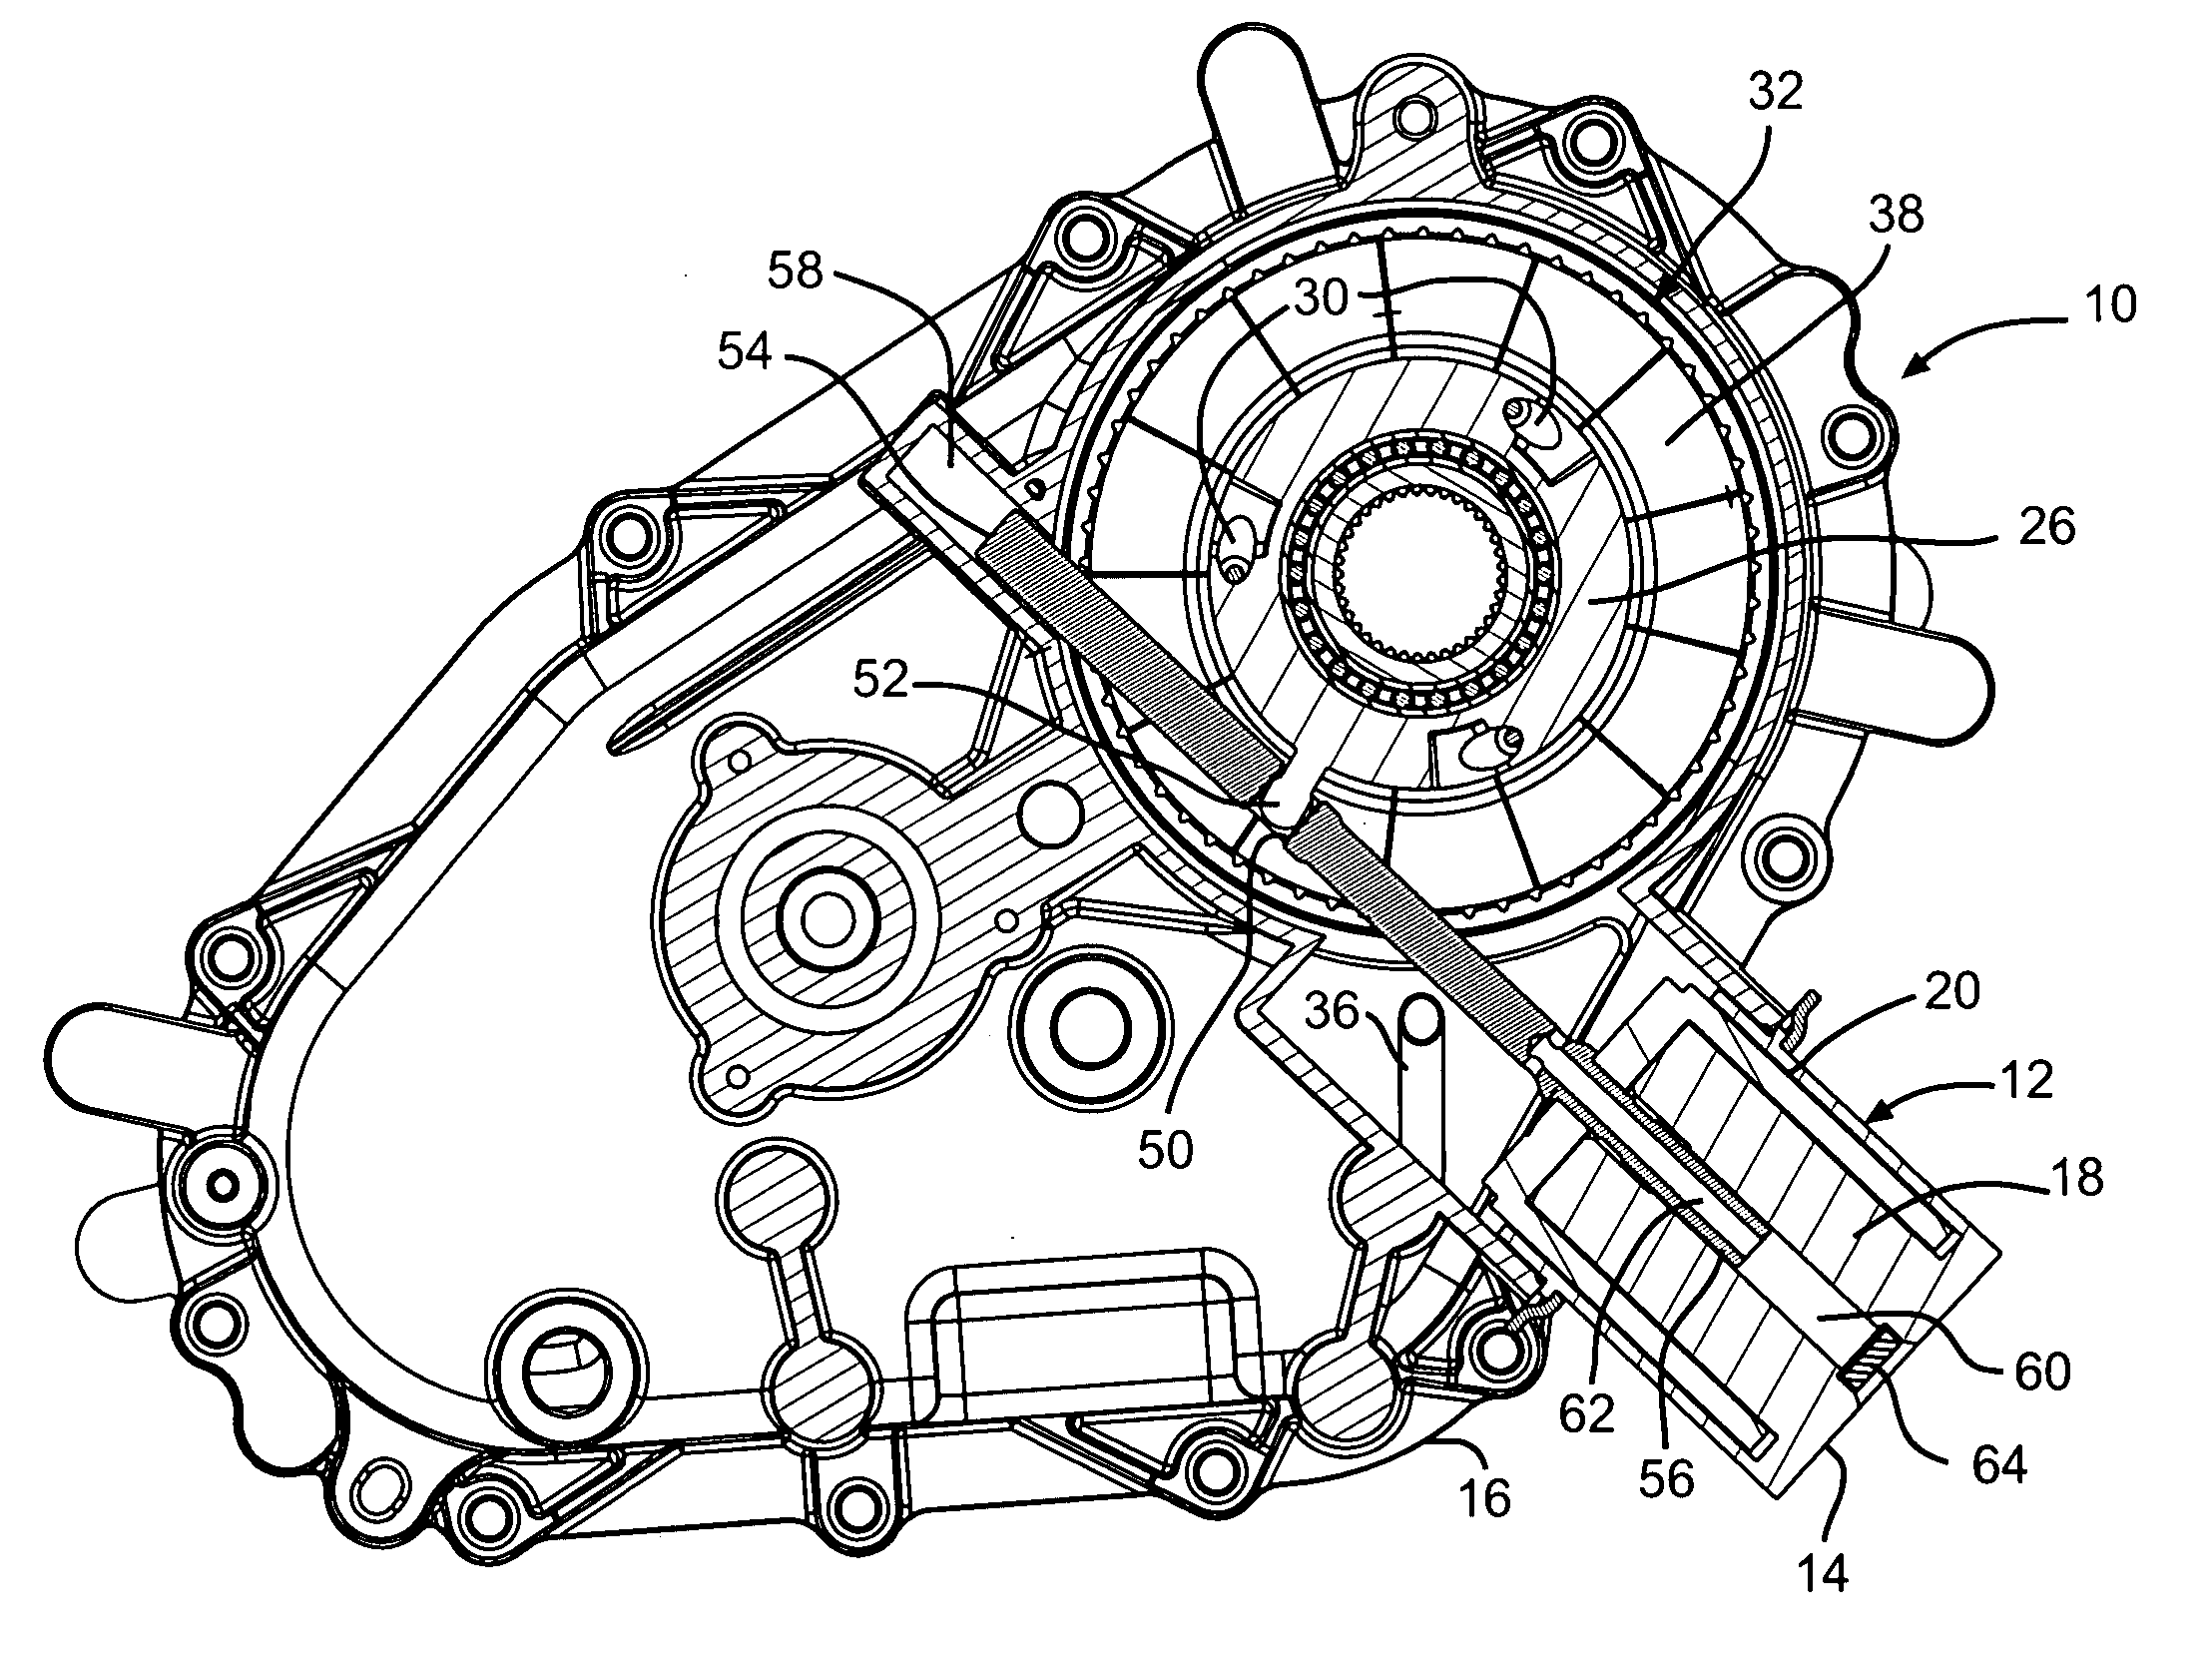 Transfer case with moving coil clutch actuator operator